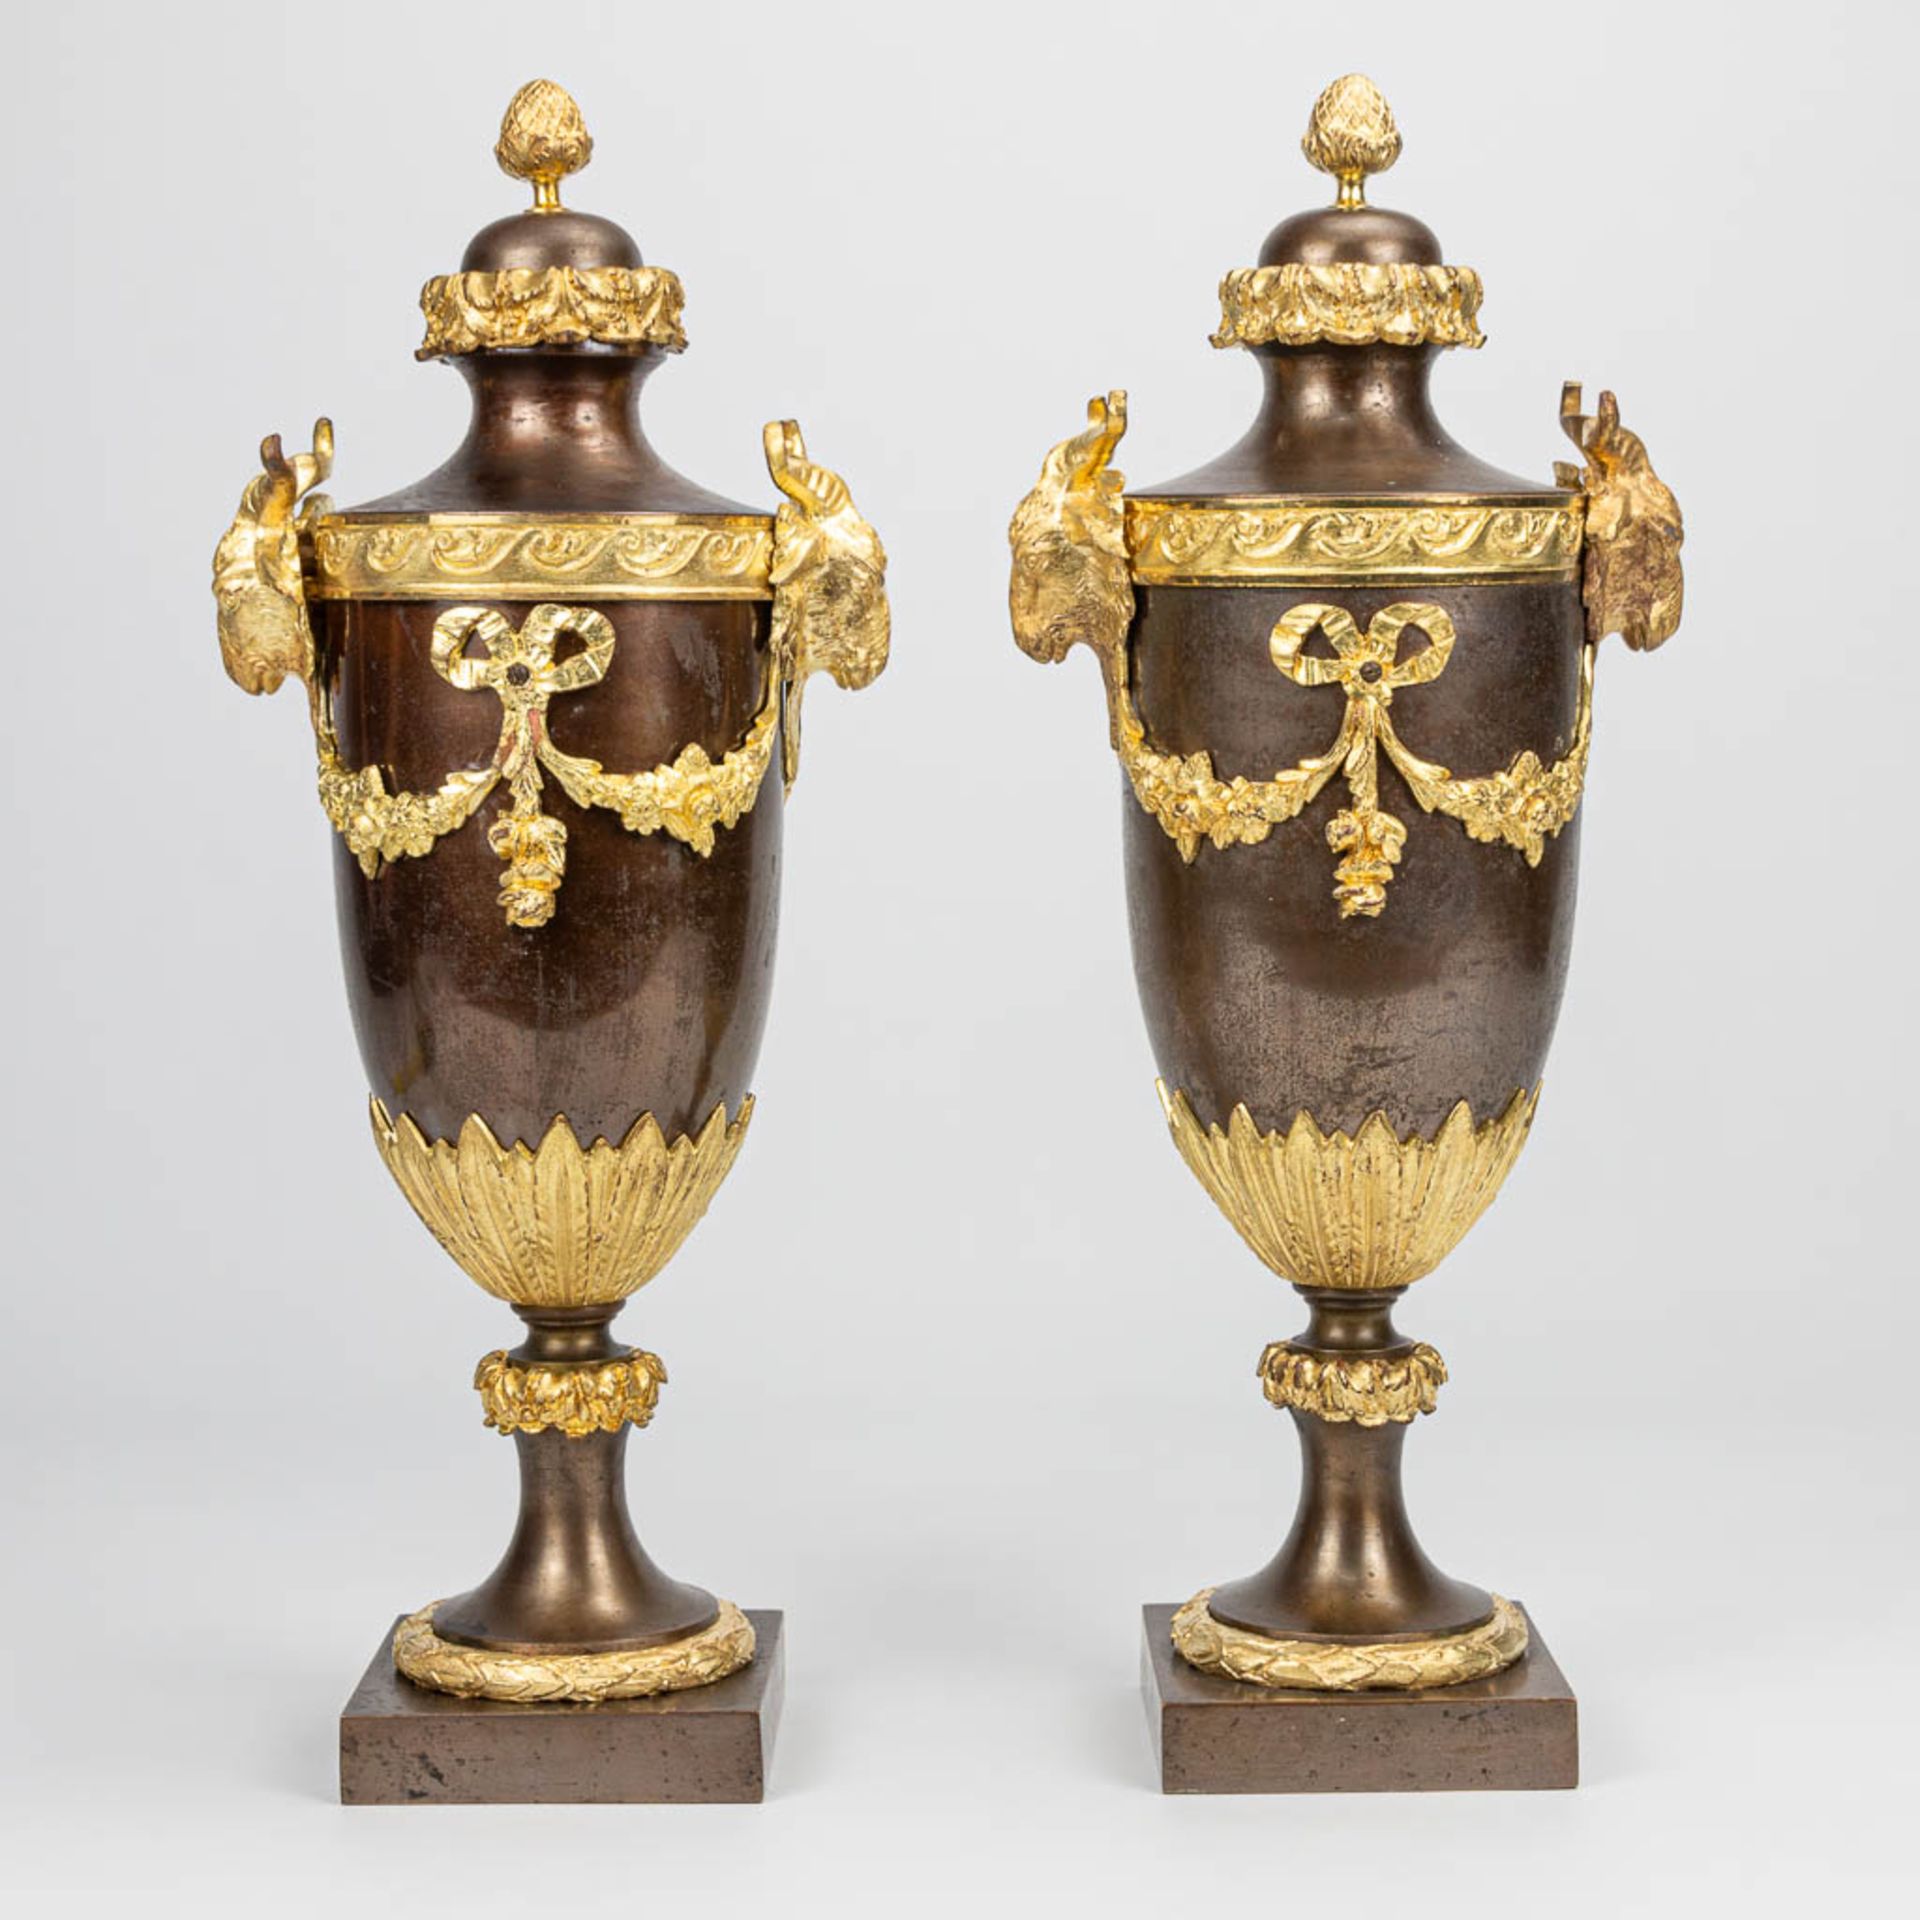 A pair of casolettes with ram's heads made of bronze and mounted with gilt bronze. Napoleon 3. (14 x